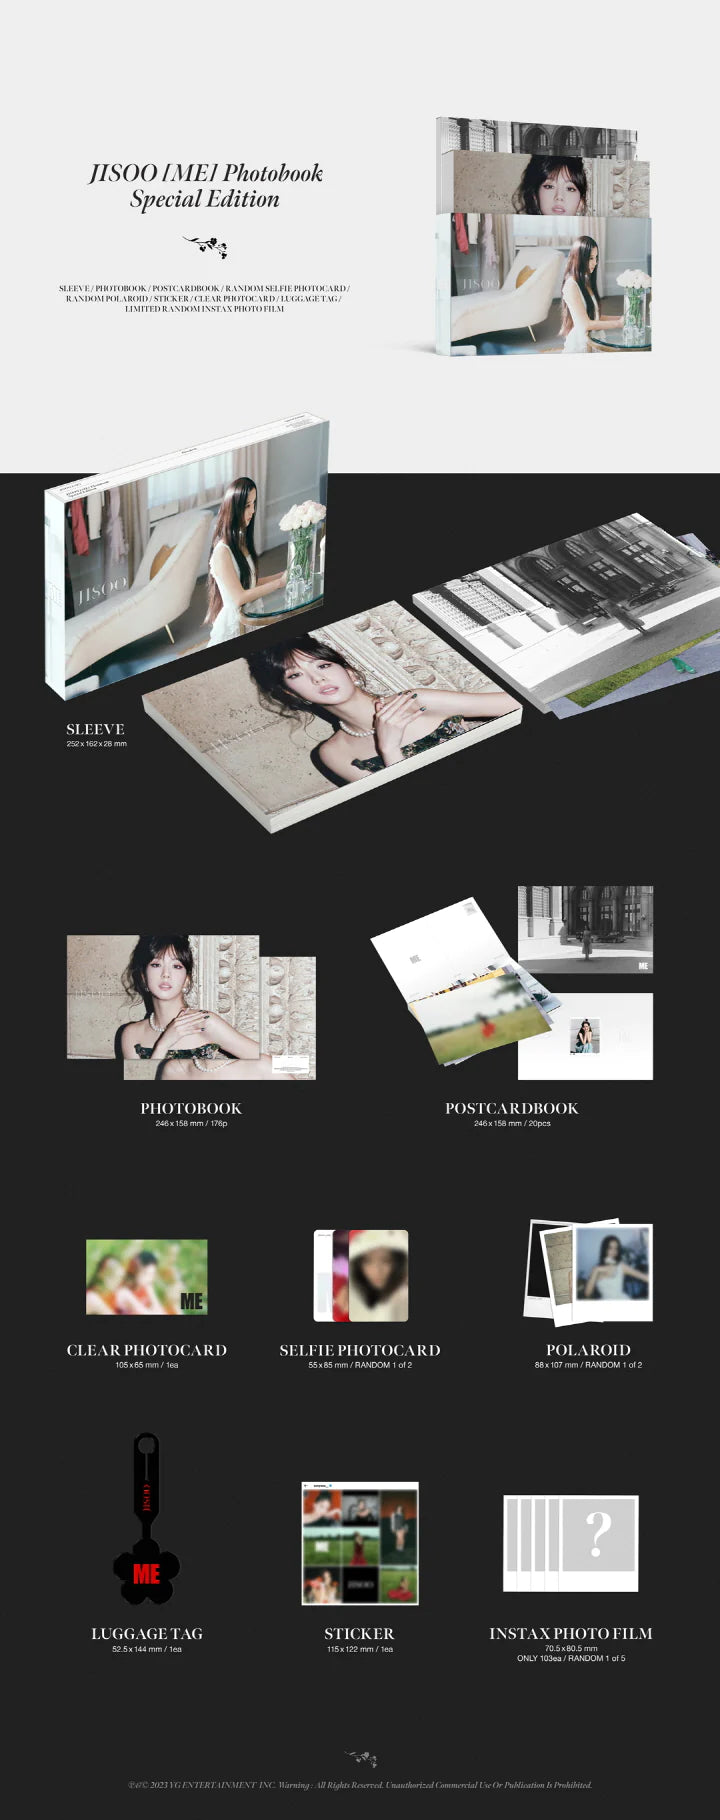 JISOO - [ME] PHOTOBOOK SPECIAL EDITION Infographic